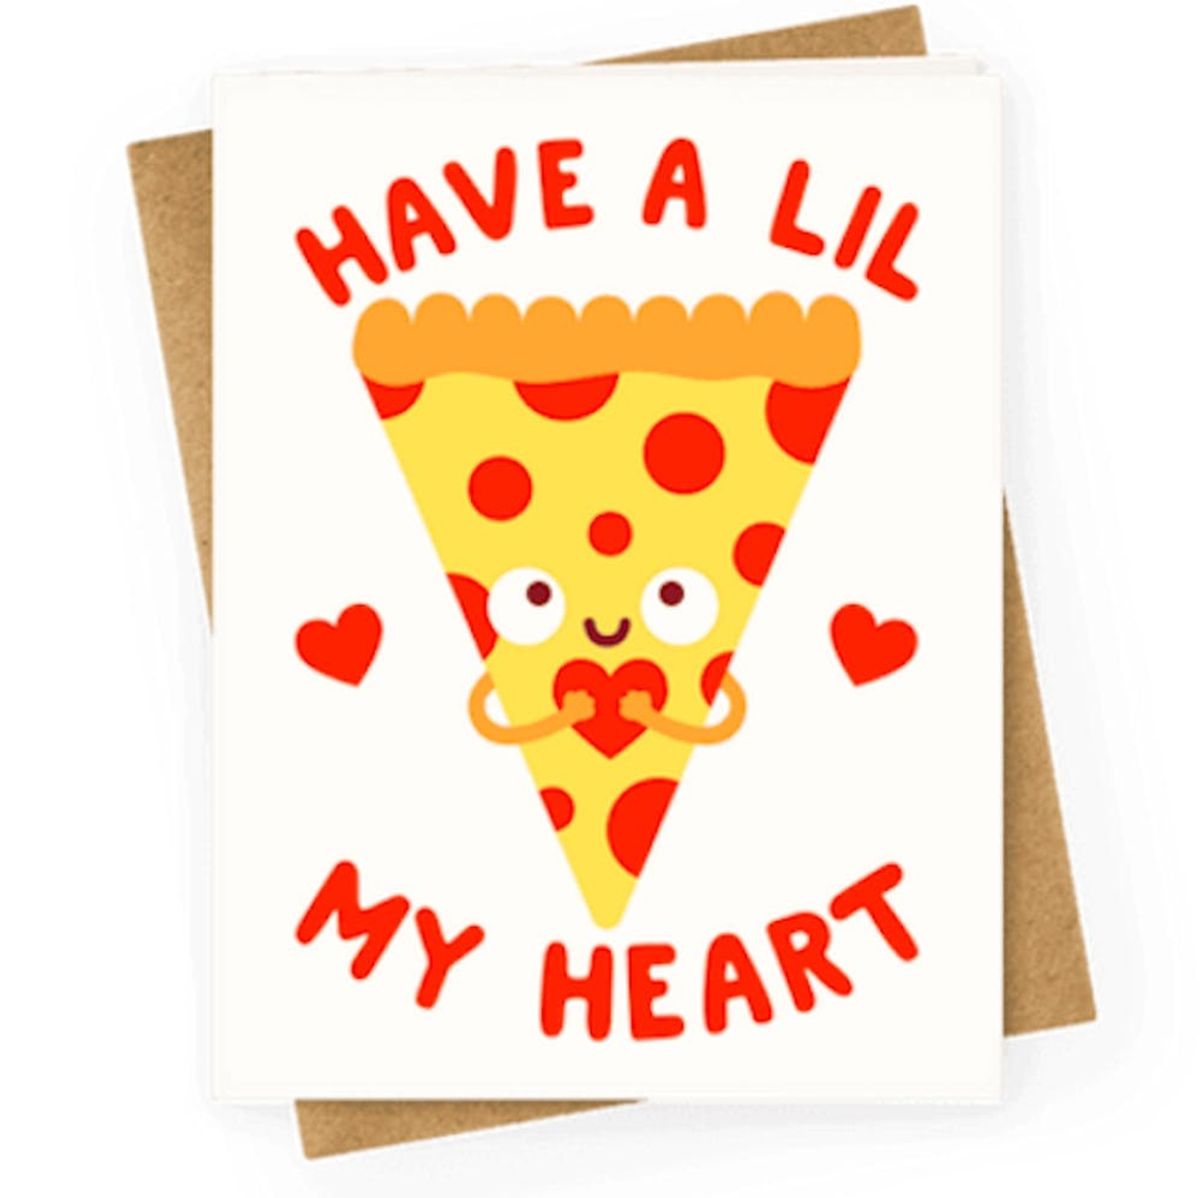 12 Punny Valentine’s Day Cards Your S.O. Will Love